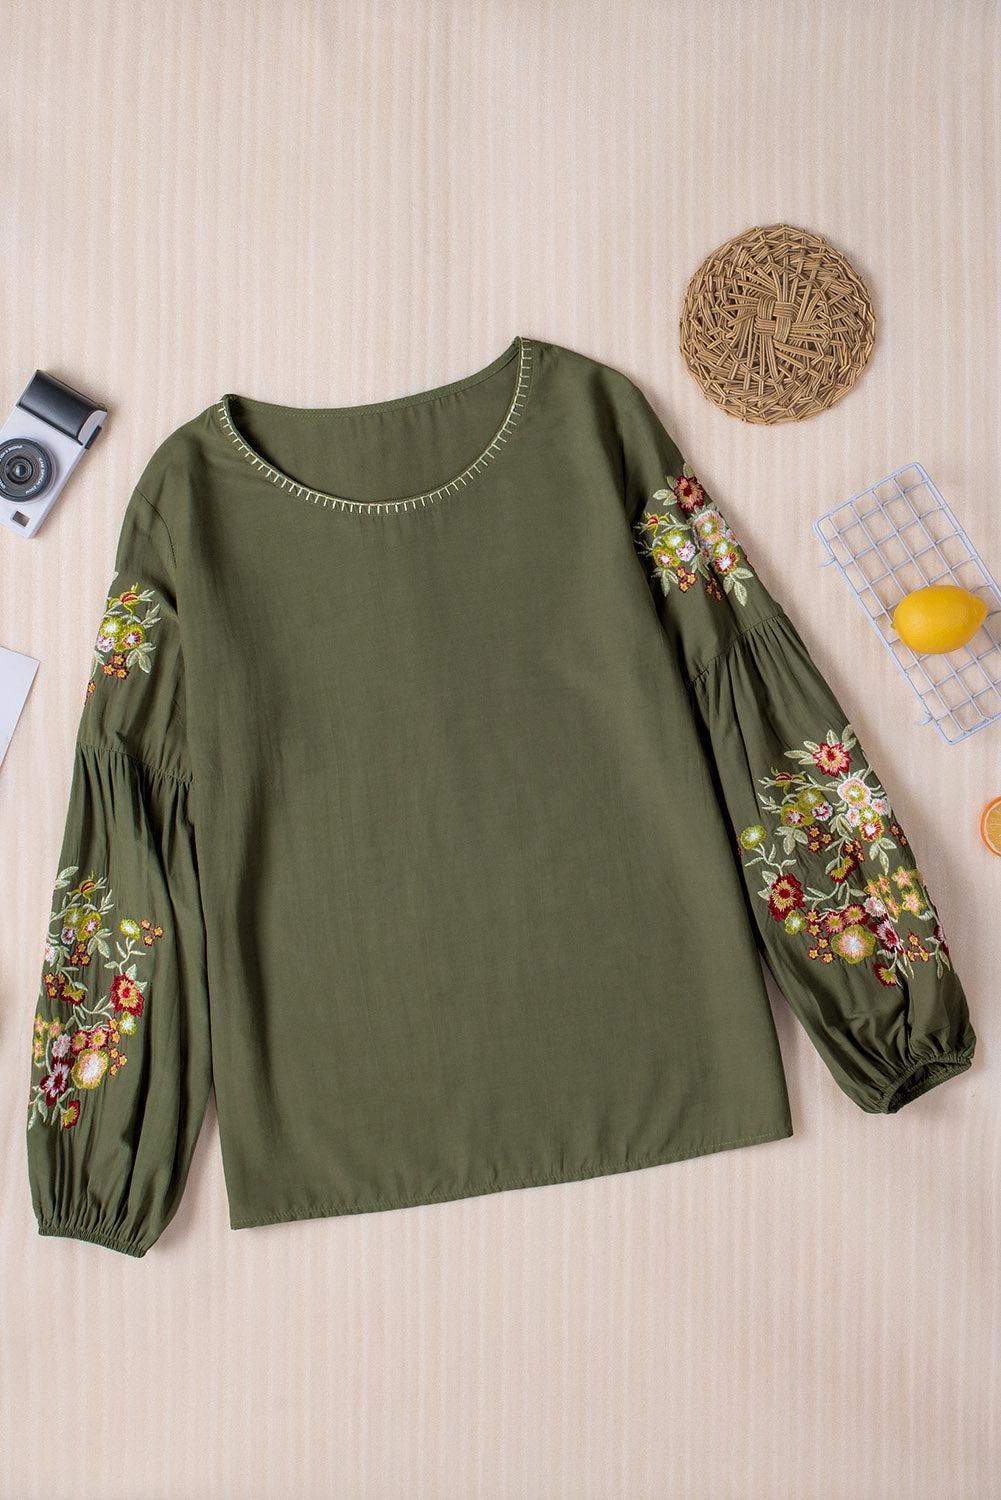 a green top with a floral design on it